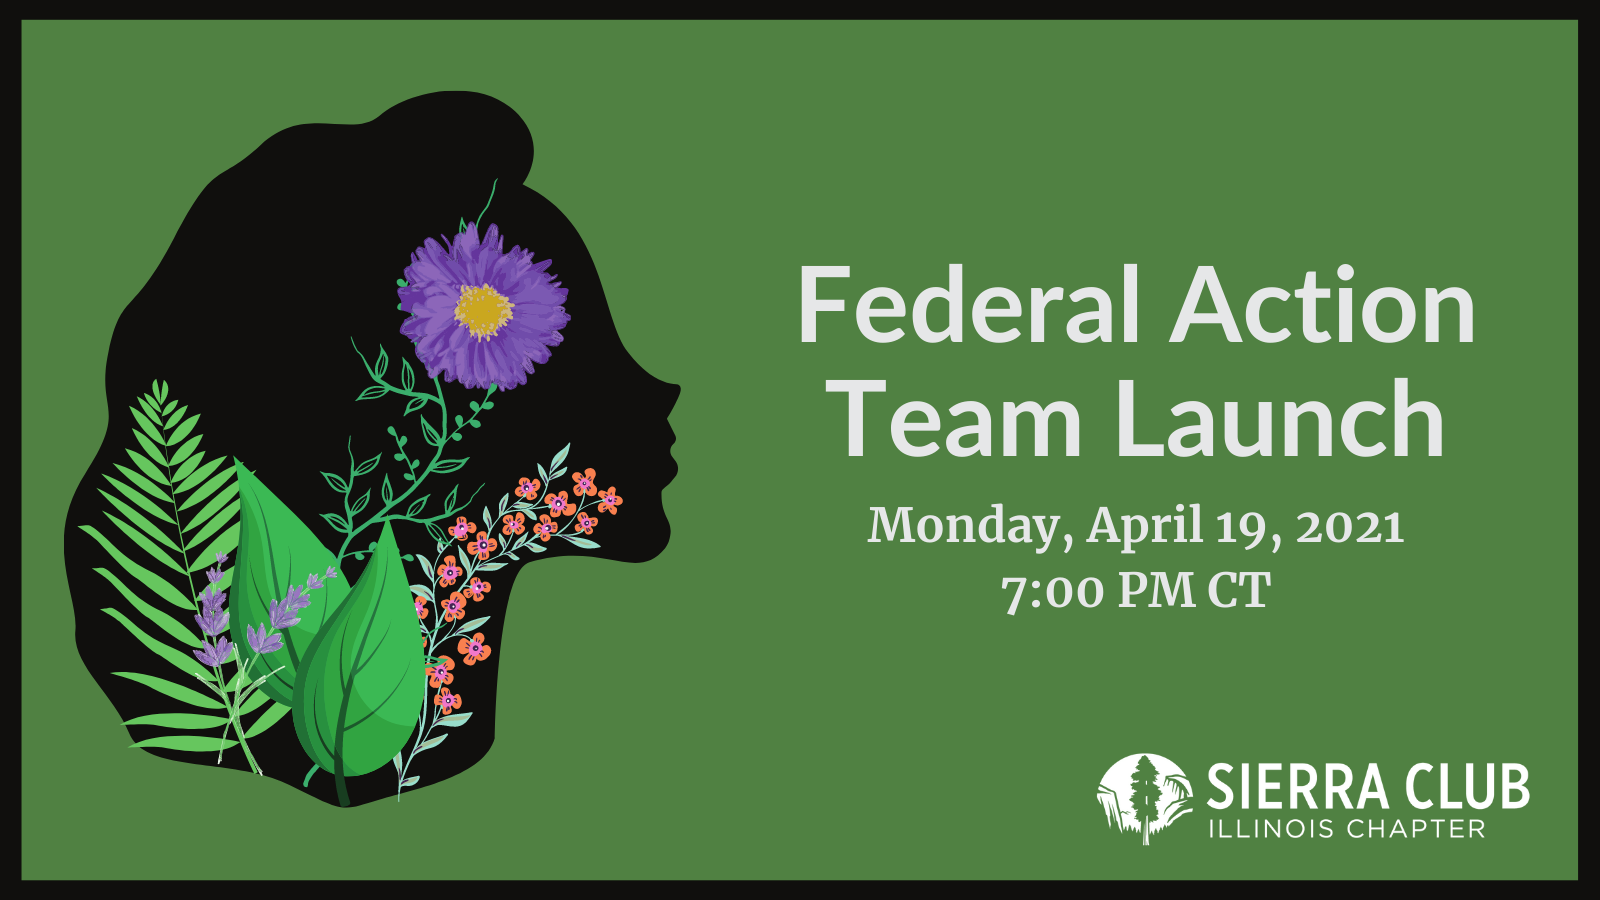 A woman made of plants next to text that reads Federal Action Team Launch, Monday April 19